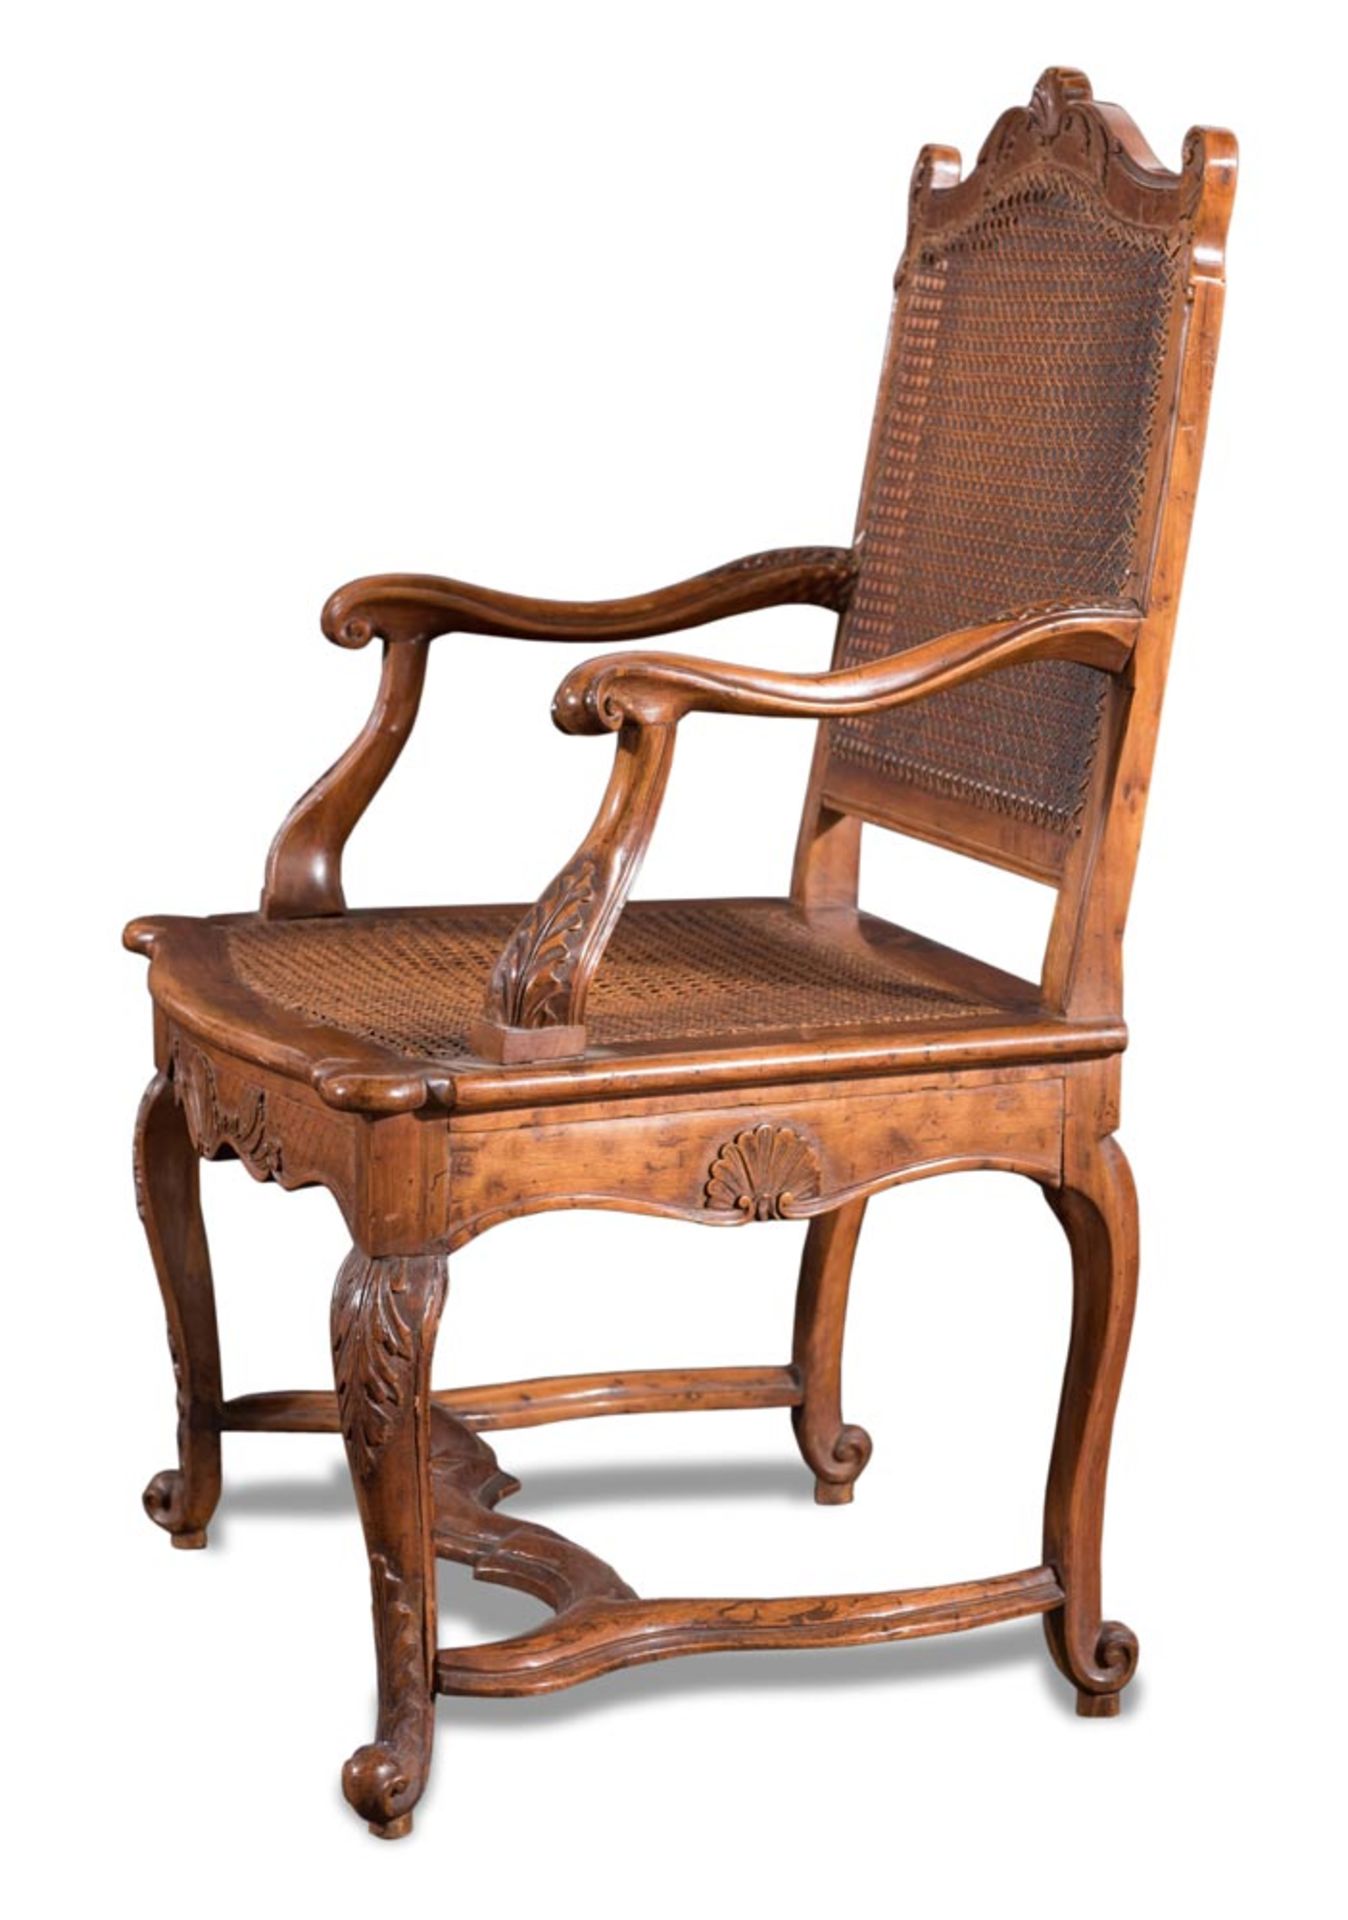 Carved walnut fauteuils with caned back and seat, X18th Century.